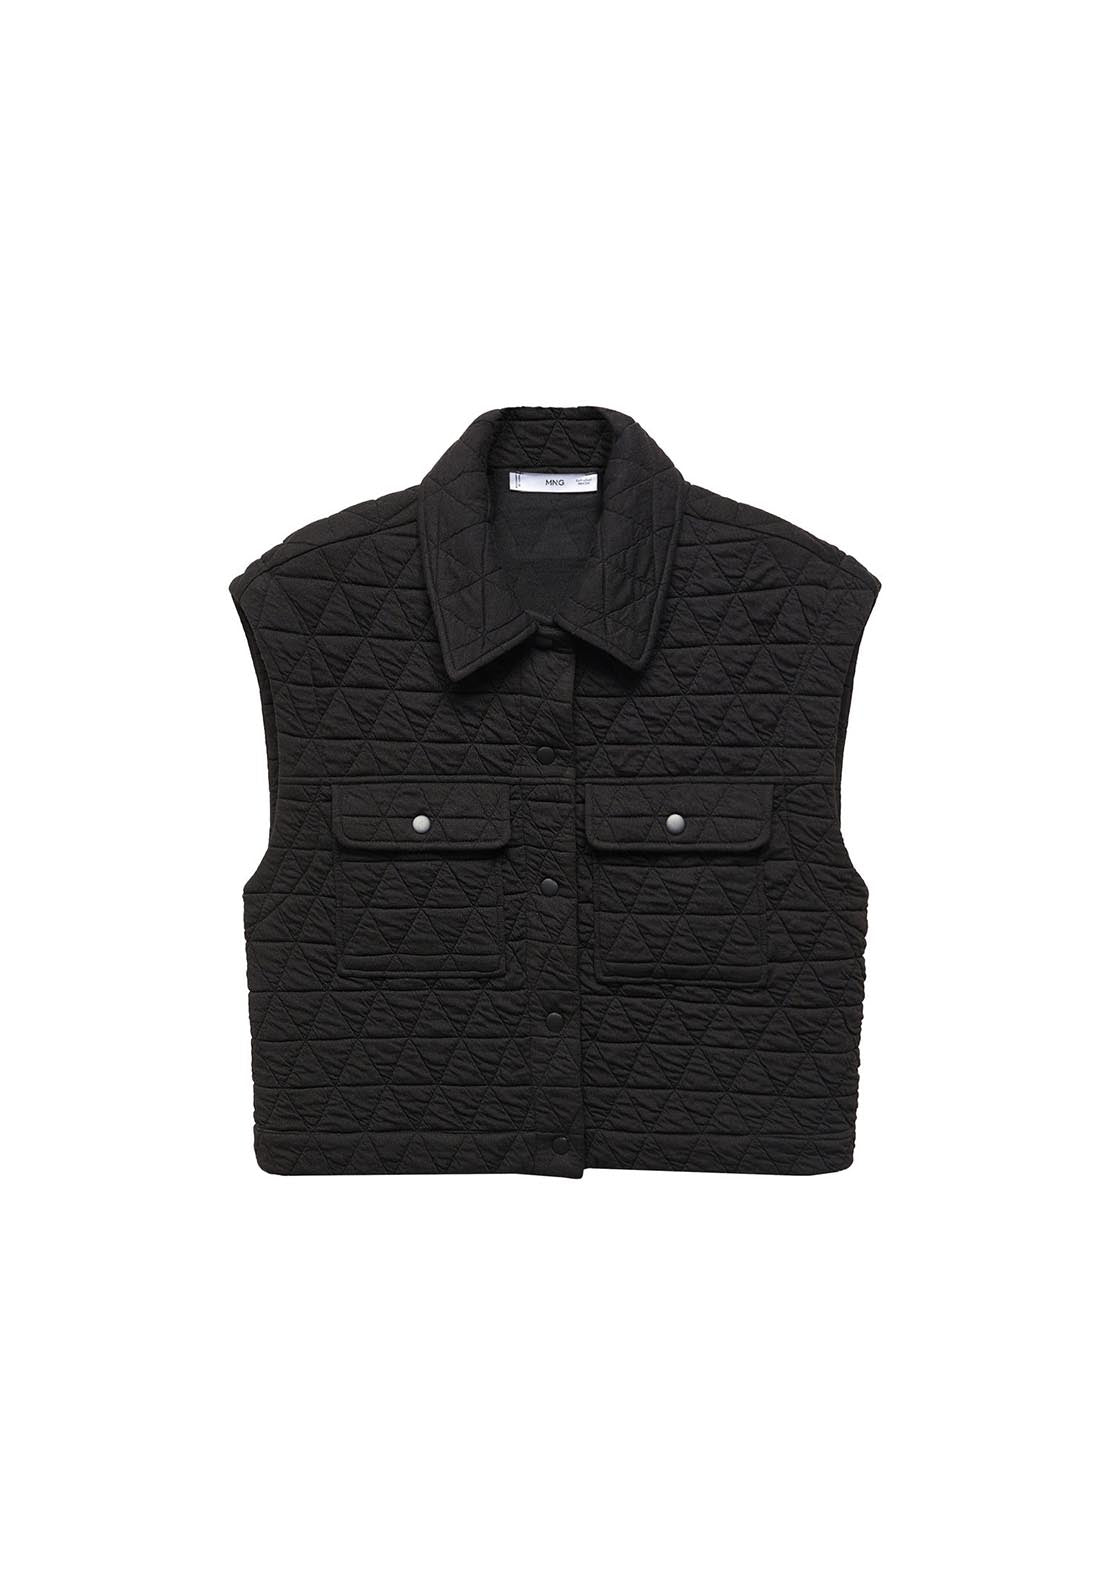 Mango Quilted gilet with buttons 1 Shaws Department Stores